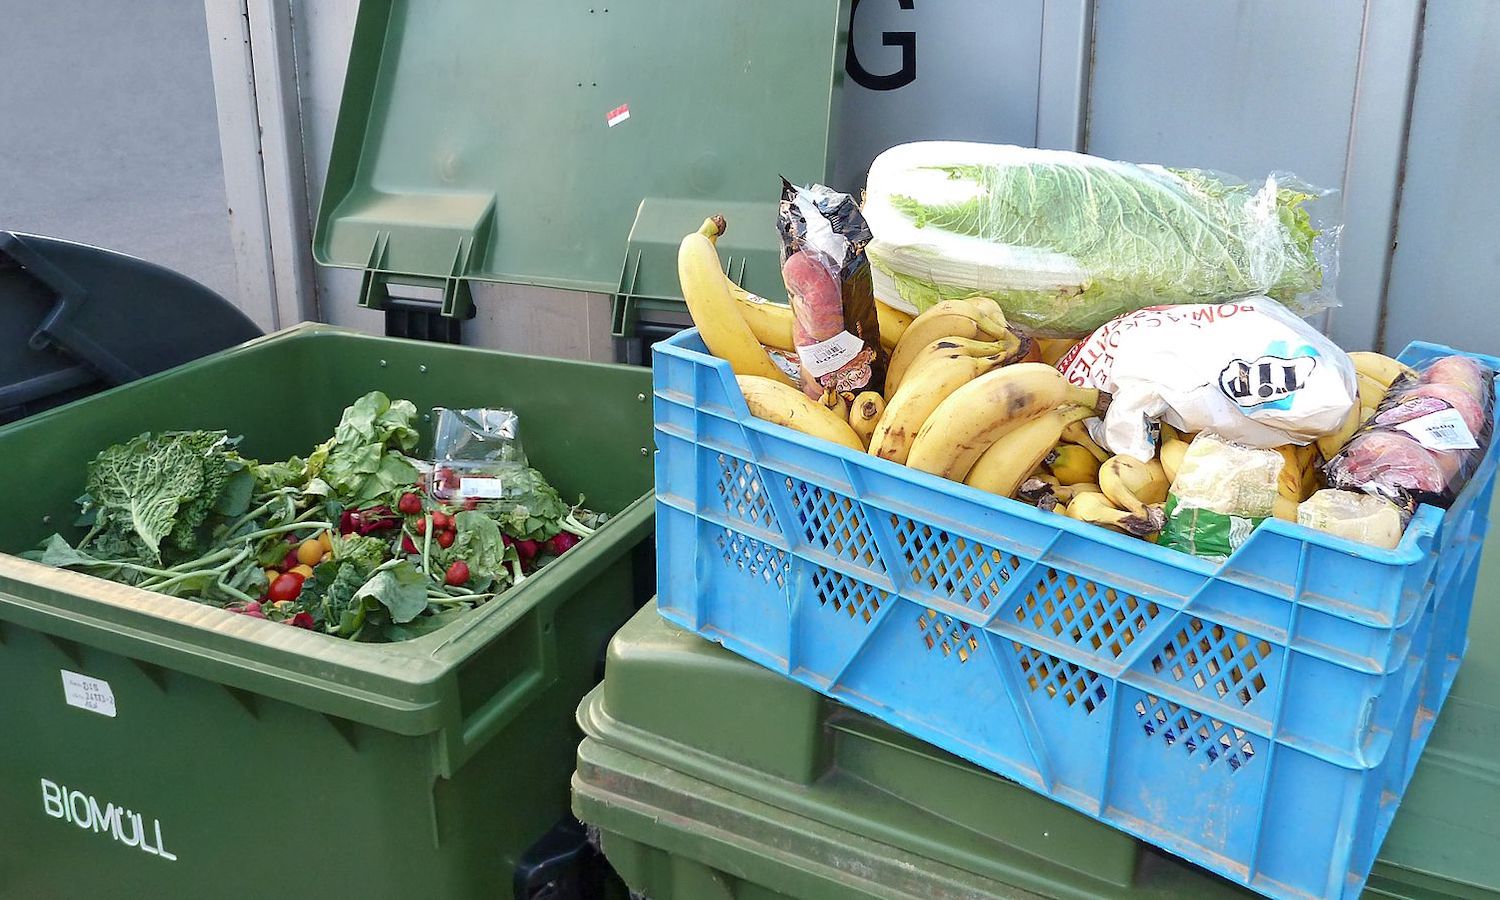 New York State Act to Reduce Hunger and Food Waste